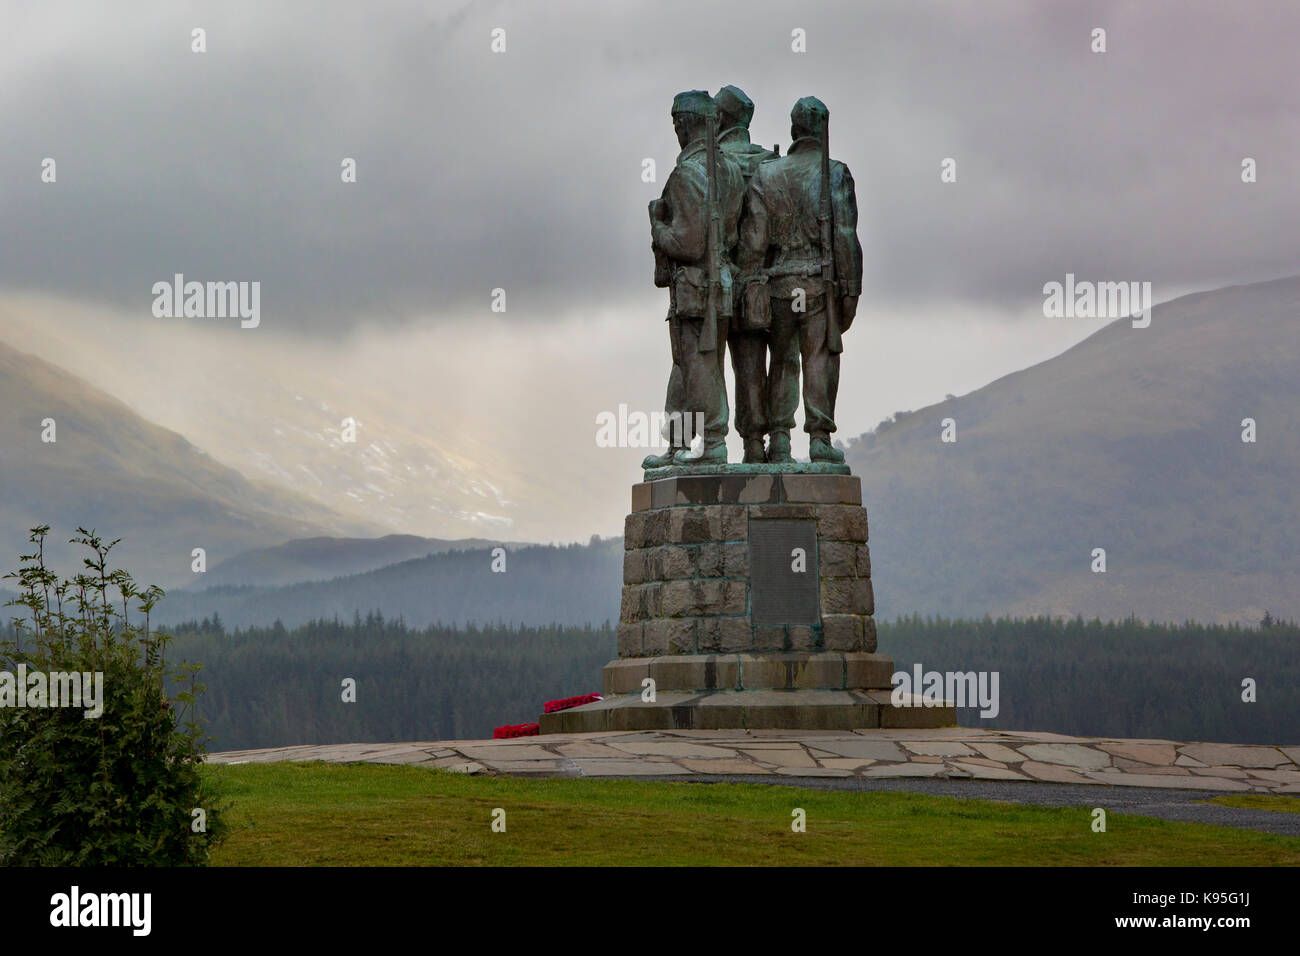 The Commando Memorial - a Category A listed monument to the British Commando Forces lost in World War II, Spean Bridge, Scotland, UK Stock Photo